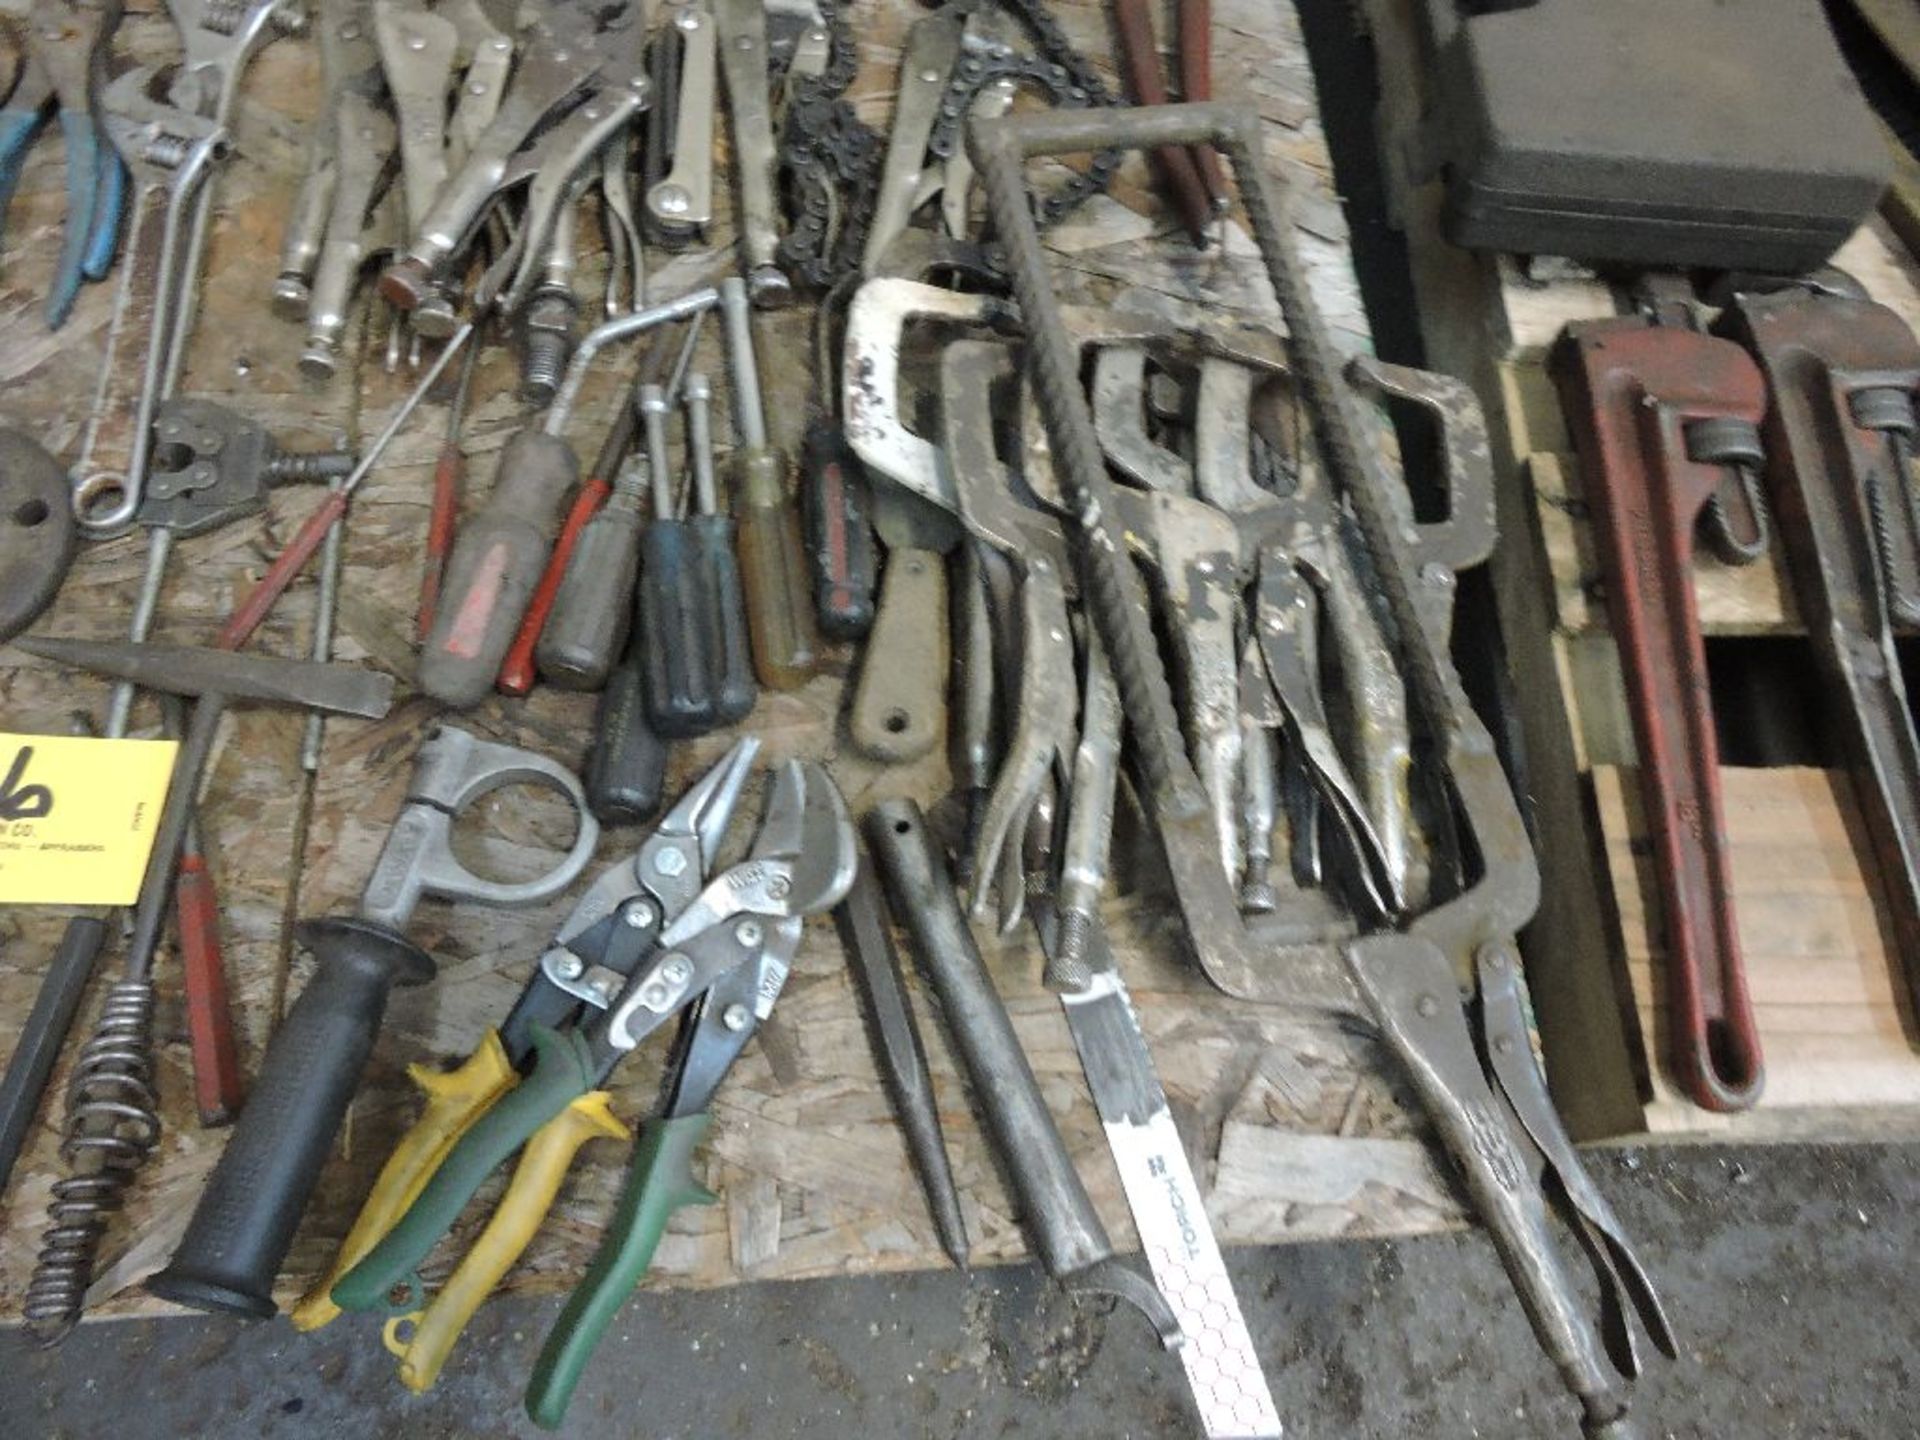 Pallet pliers, vise grips, hack saws, wrenches, drivers. - Image 3 of 4